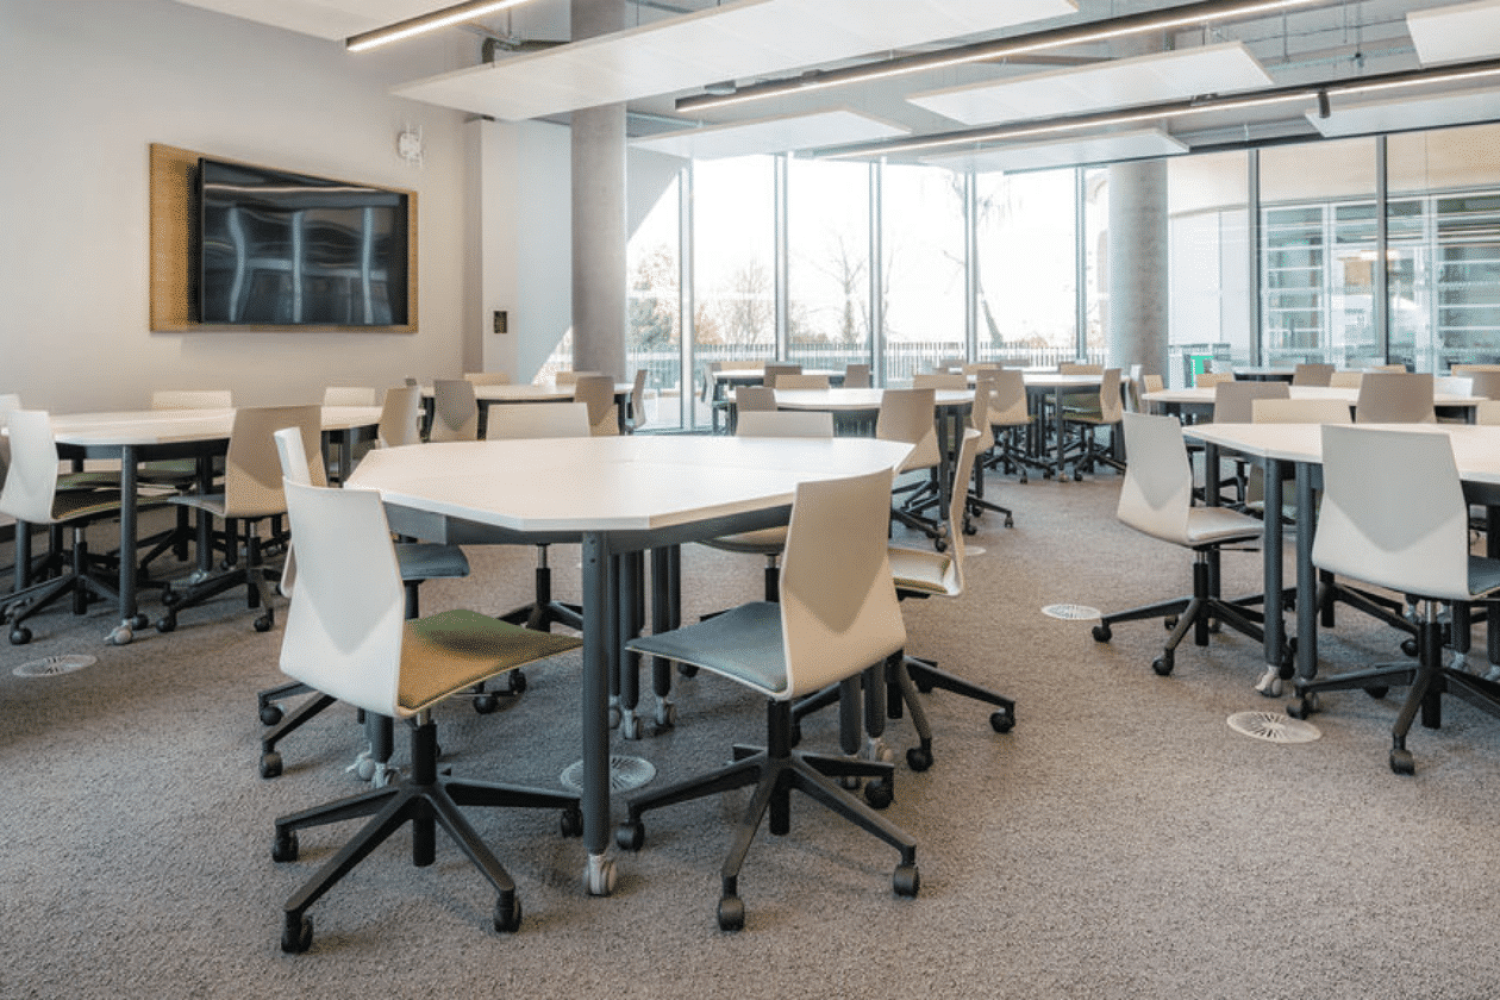 A large classroom with tables and chairs with Ocee and Four Design furniture showcasing our student centre design for the University of Sheffield